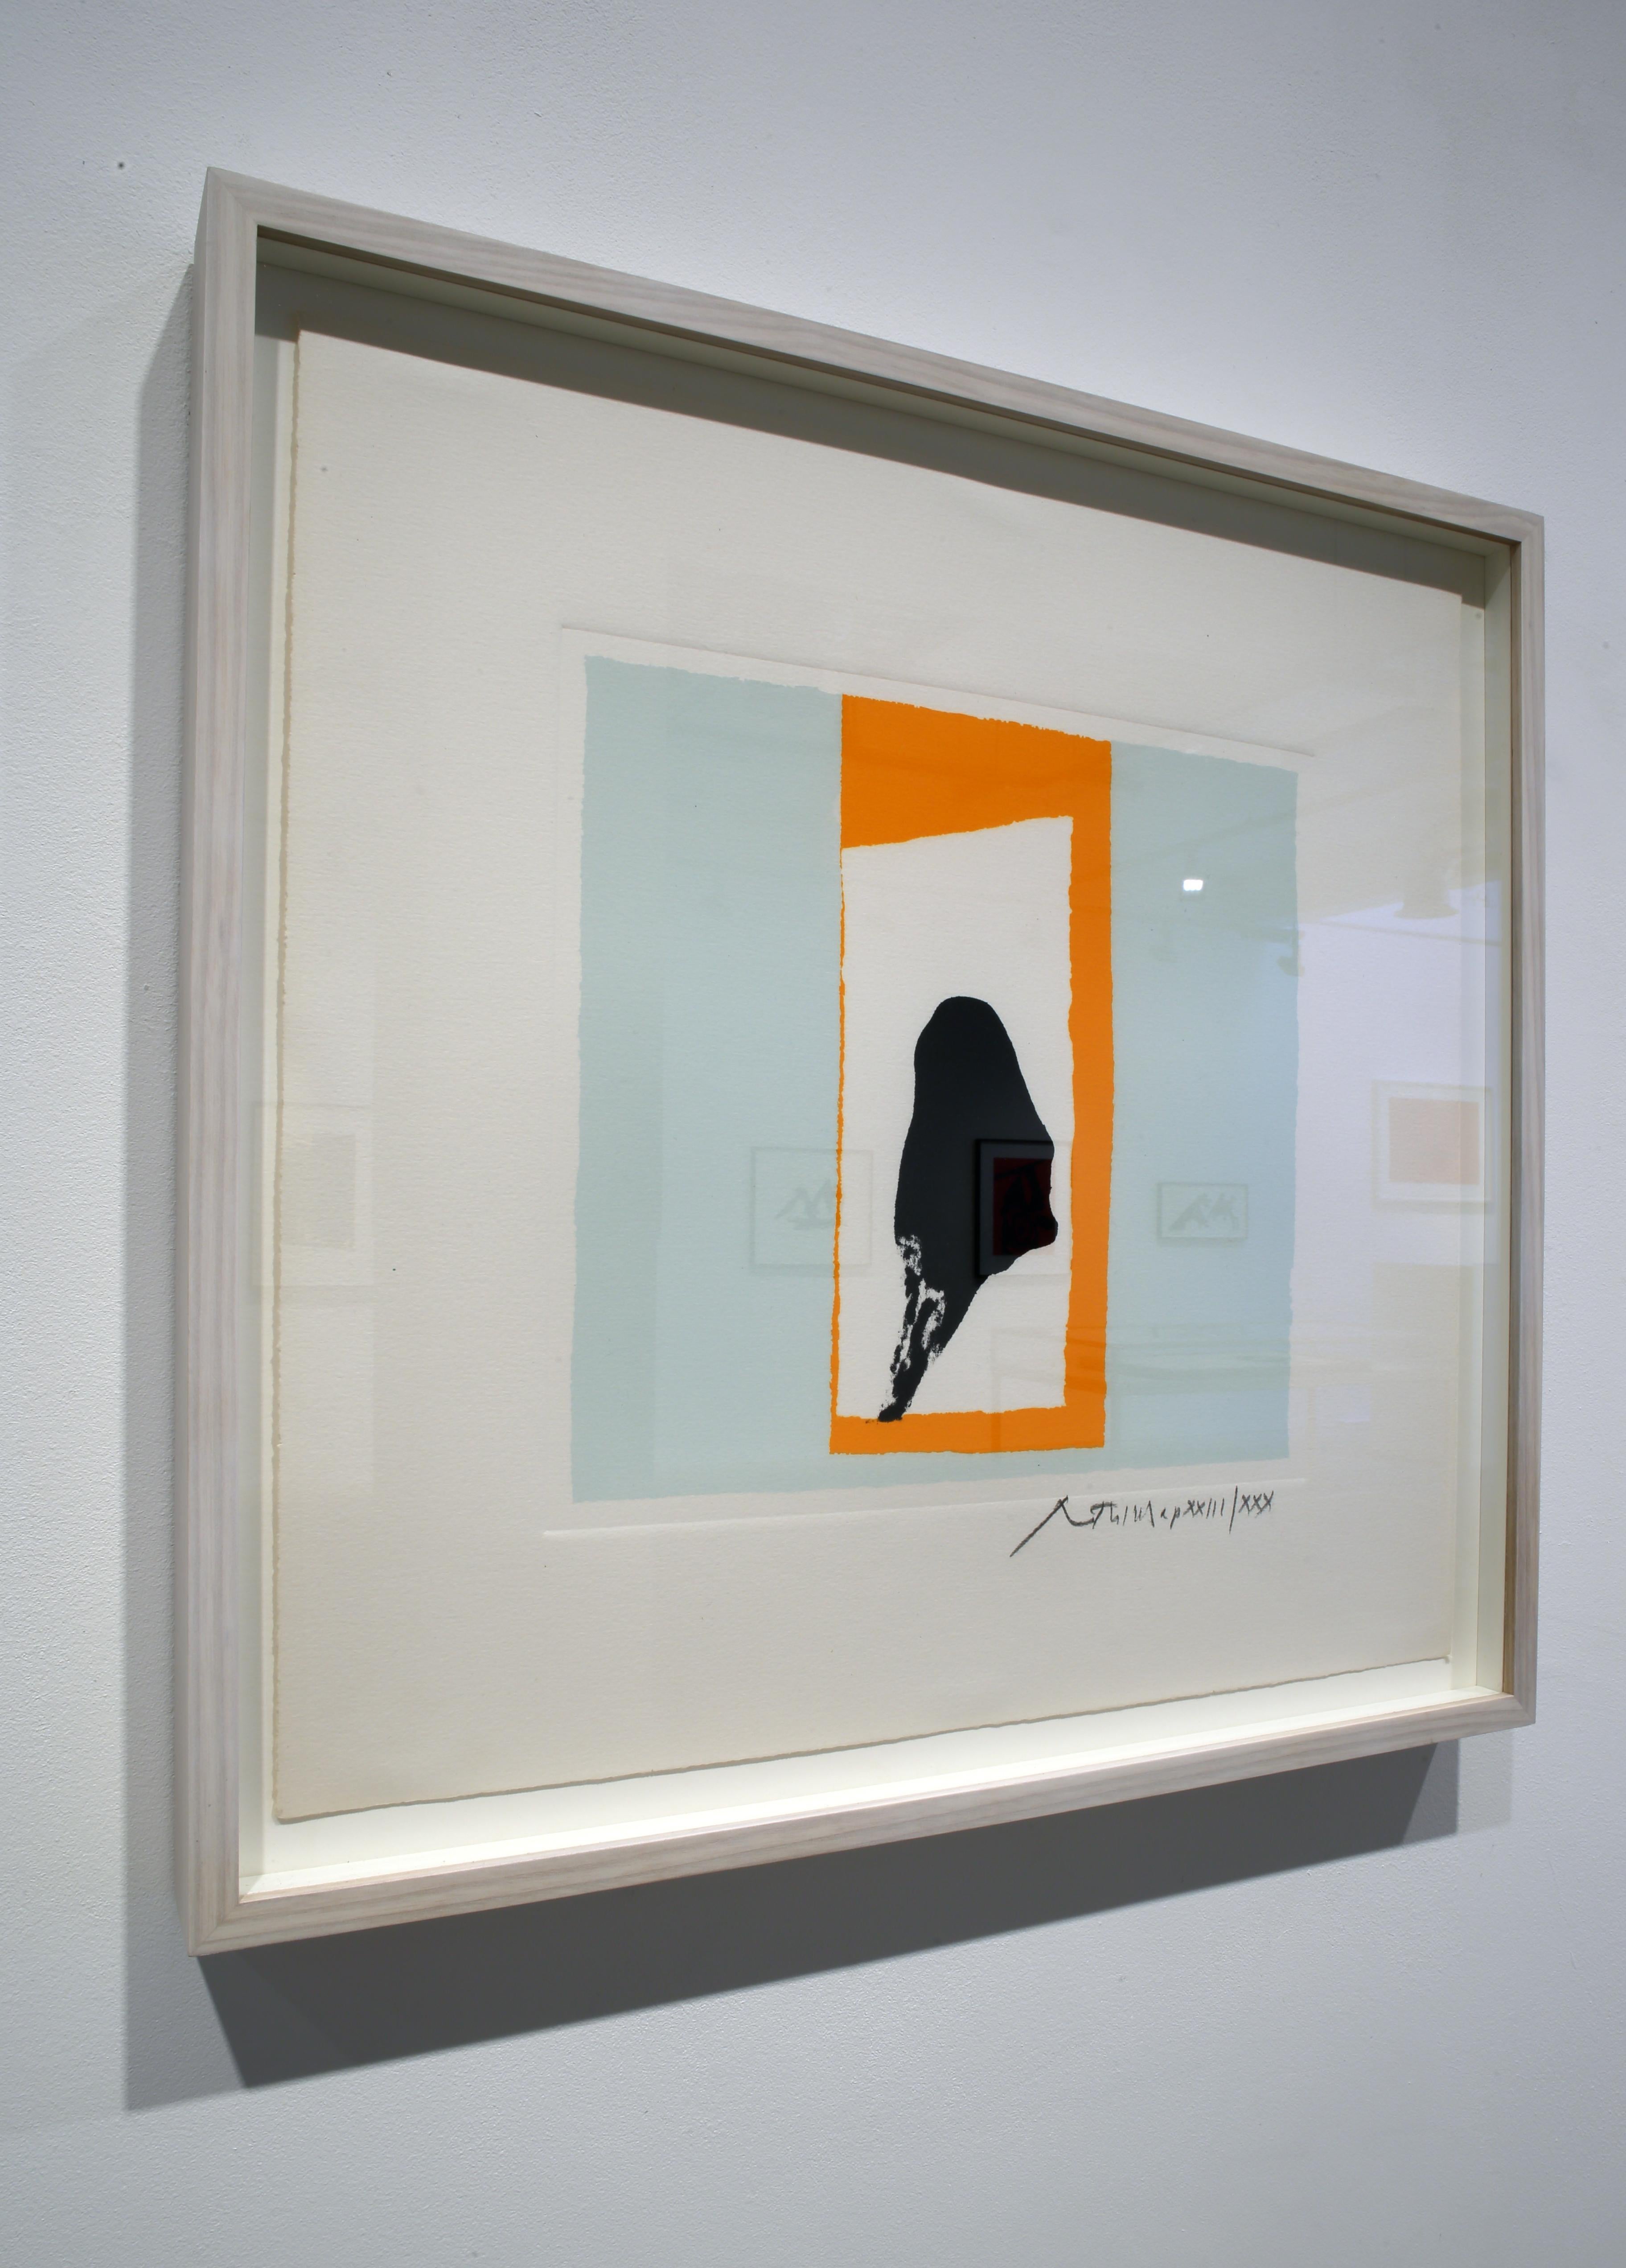 The Berggruen Series: Untitled - Abstract Expressionist Print by Robert Motherwell